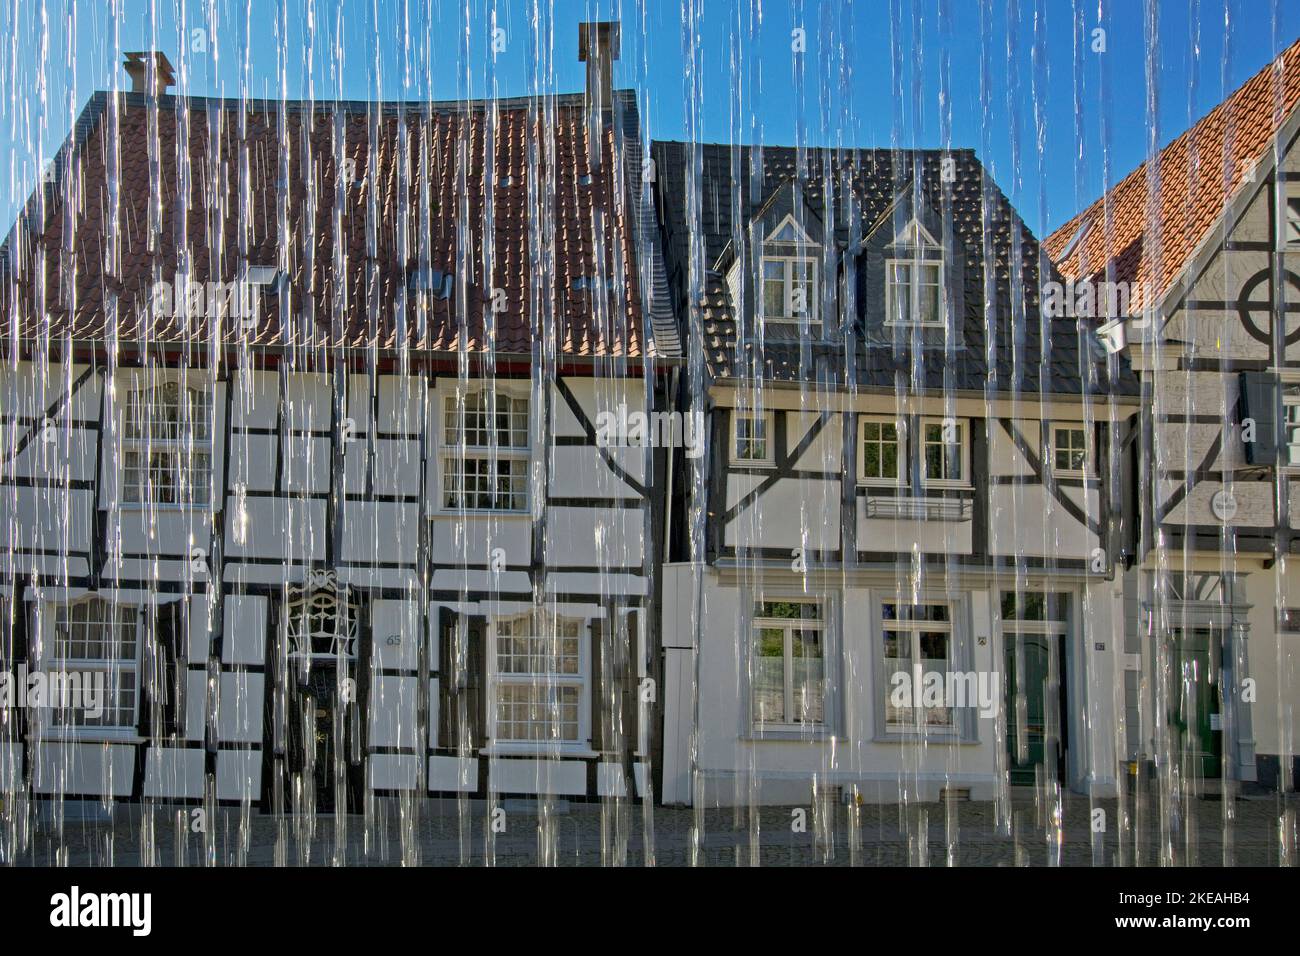 half-timber houses behind the Weberbrunnen fountain on Tuchmacherplatz in the old town of Kettwig, Germany, North Rhine-Westphalia, Ruhr Area, Essen Stock Photo